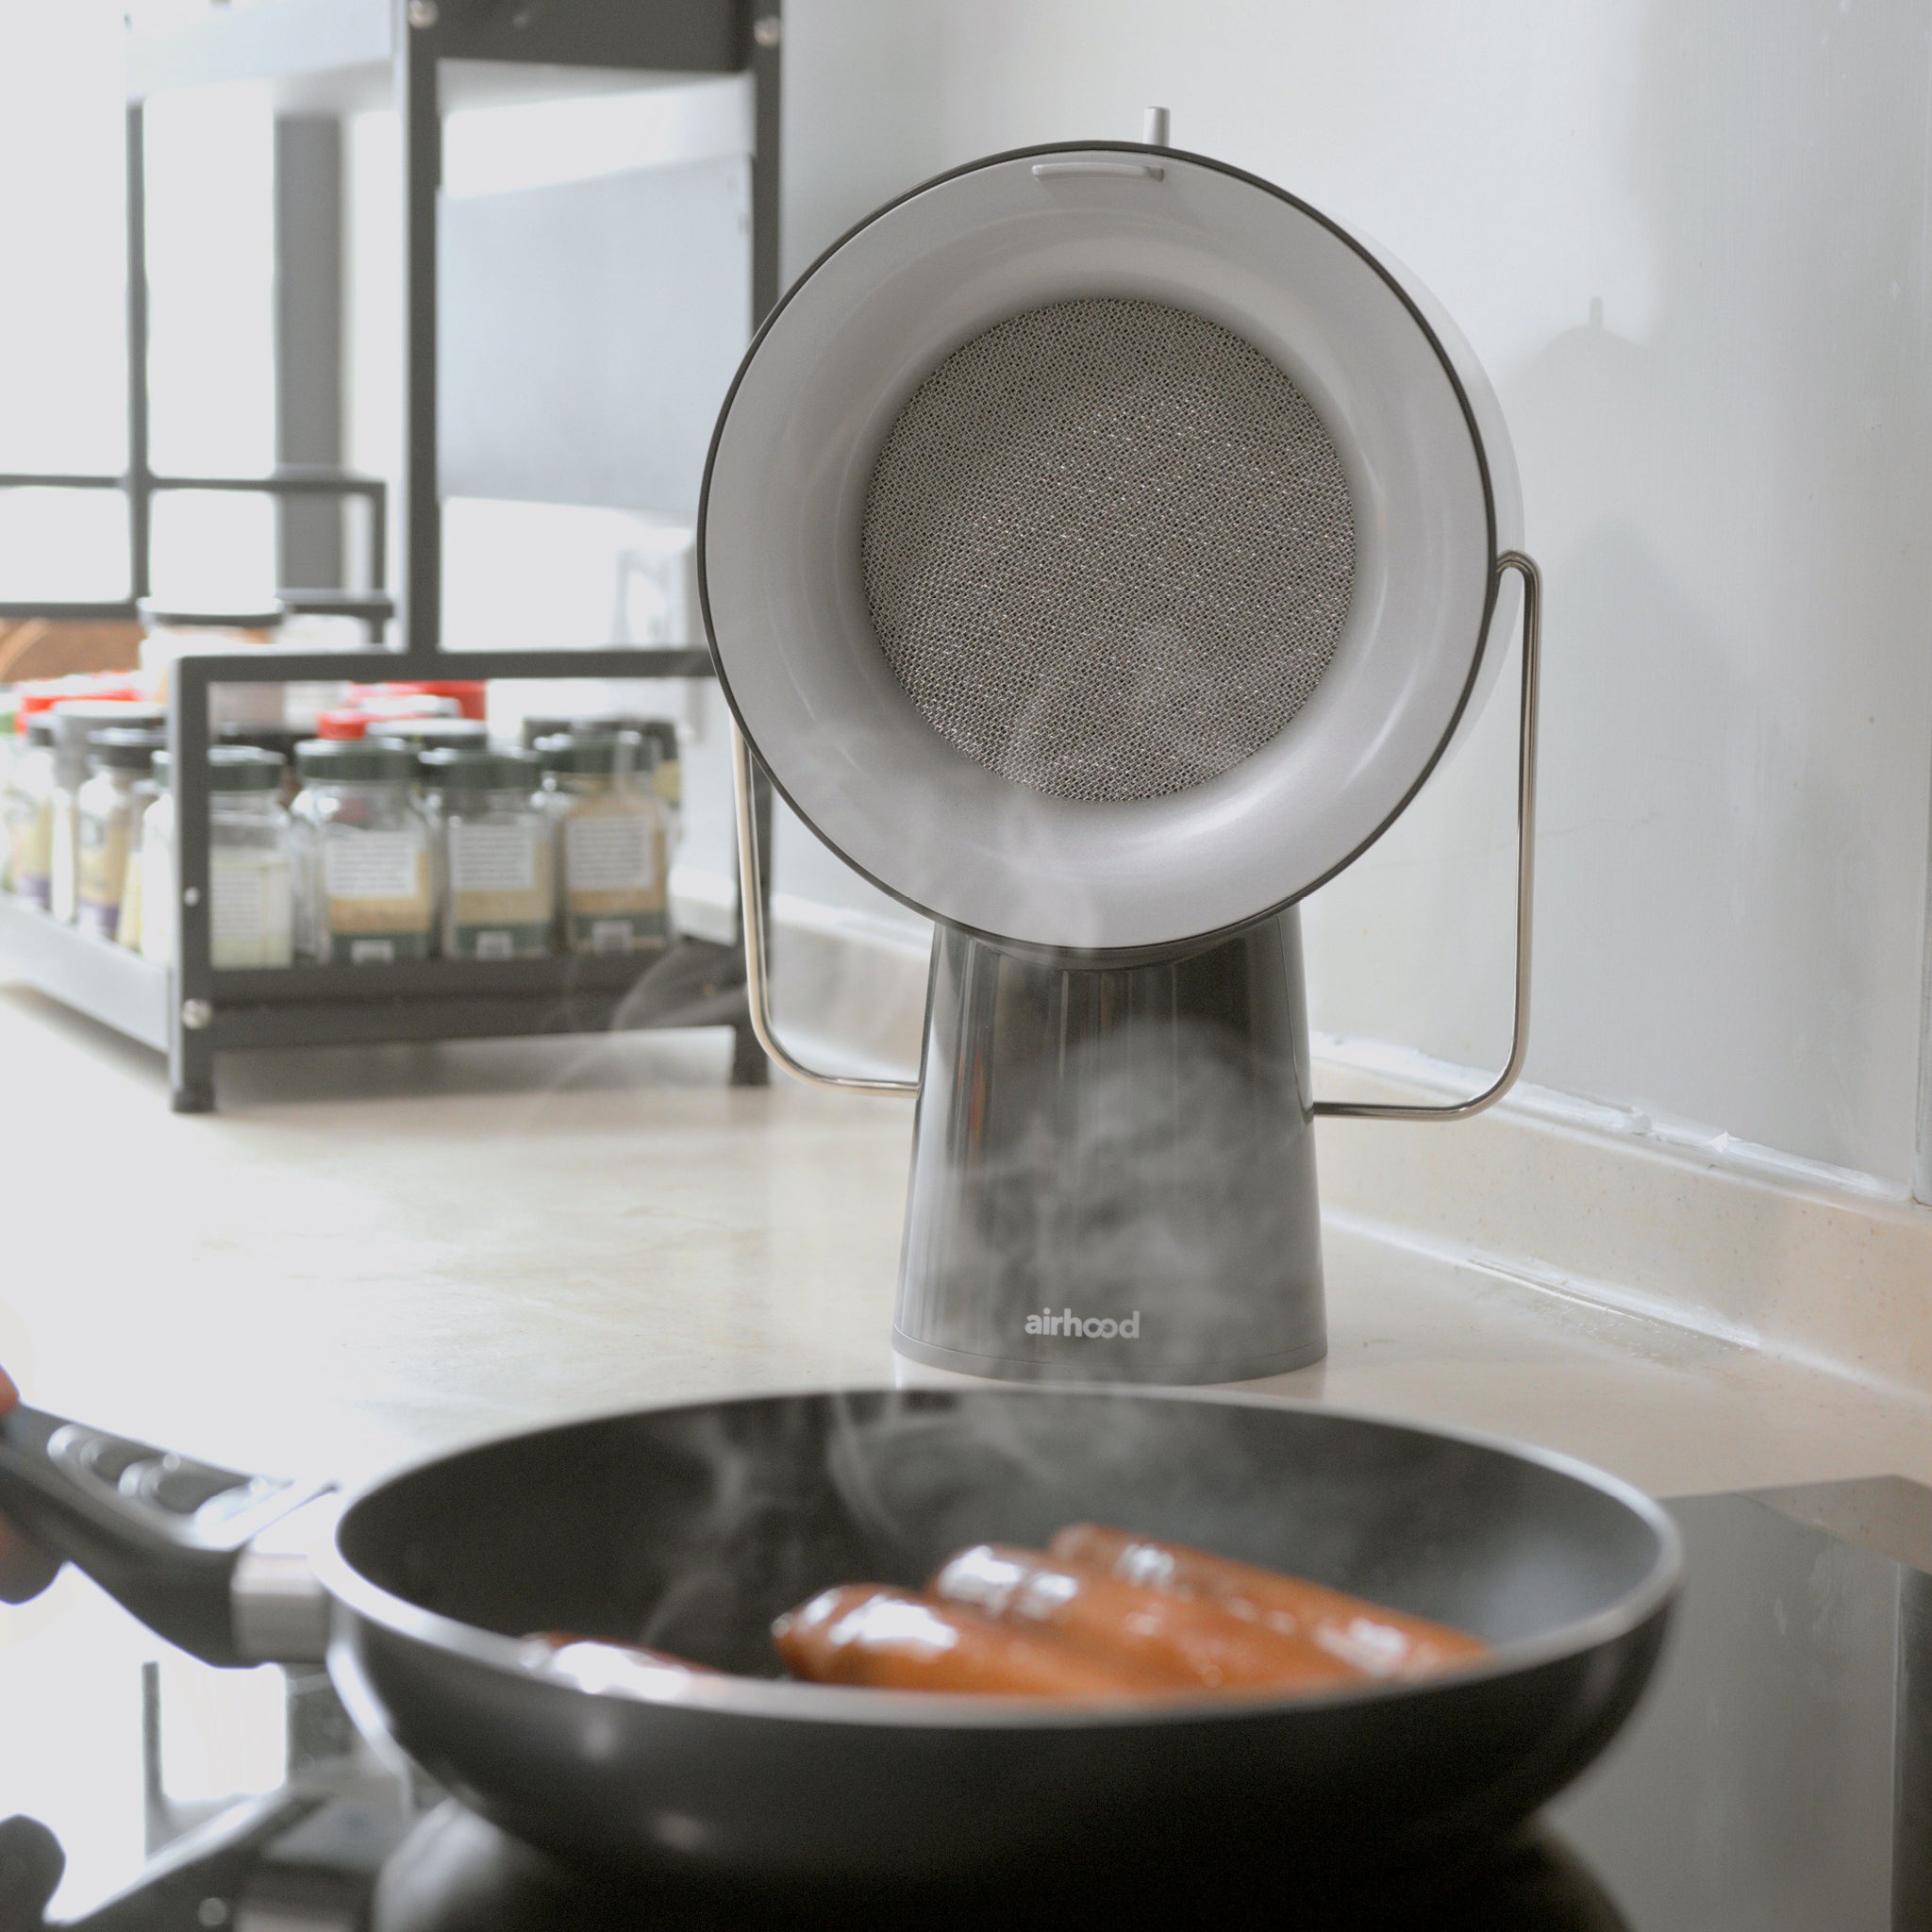 Airhood - Wireless version. The World's First Portable Kitchen Air CLEANER. Ivory White. Removes Grease, Smoke, and Cooking Odors As They Happen.